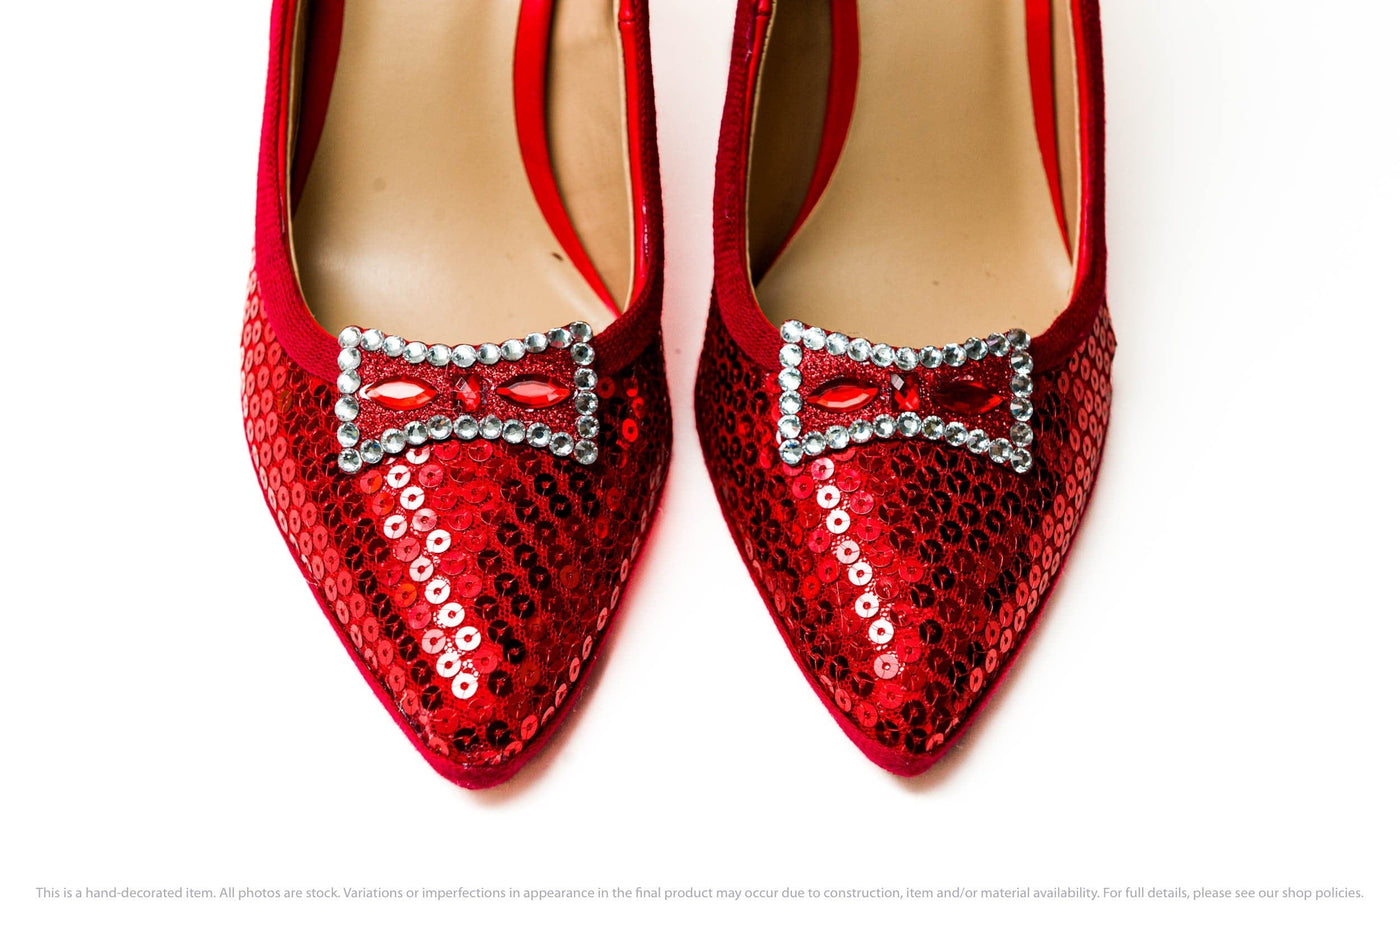 Shoes Red Sequin Stiletto Pointed Toe High Heels by Princess Pumps